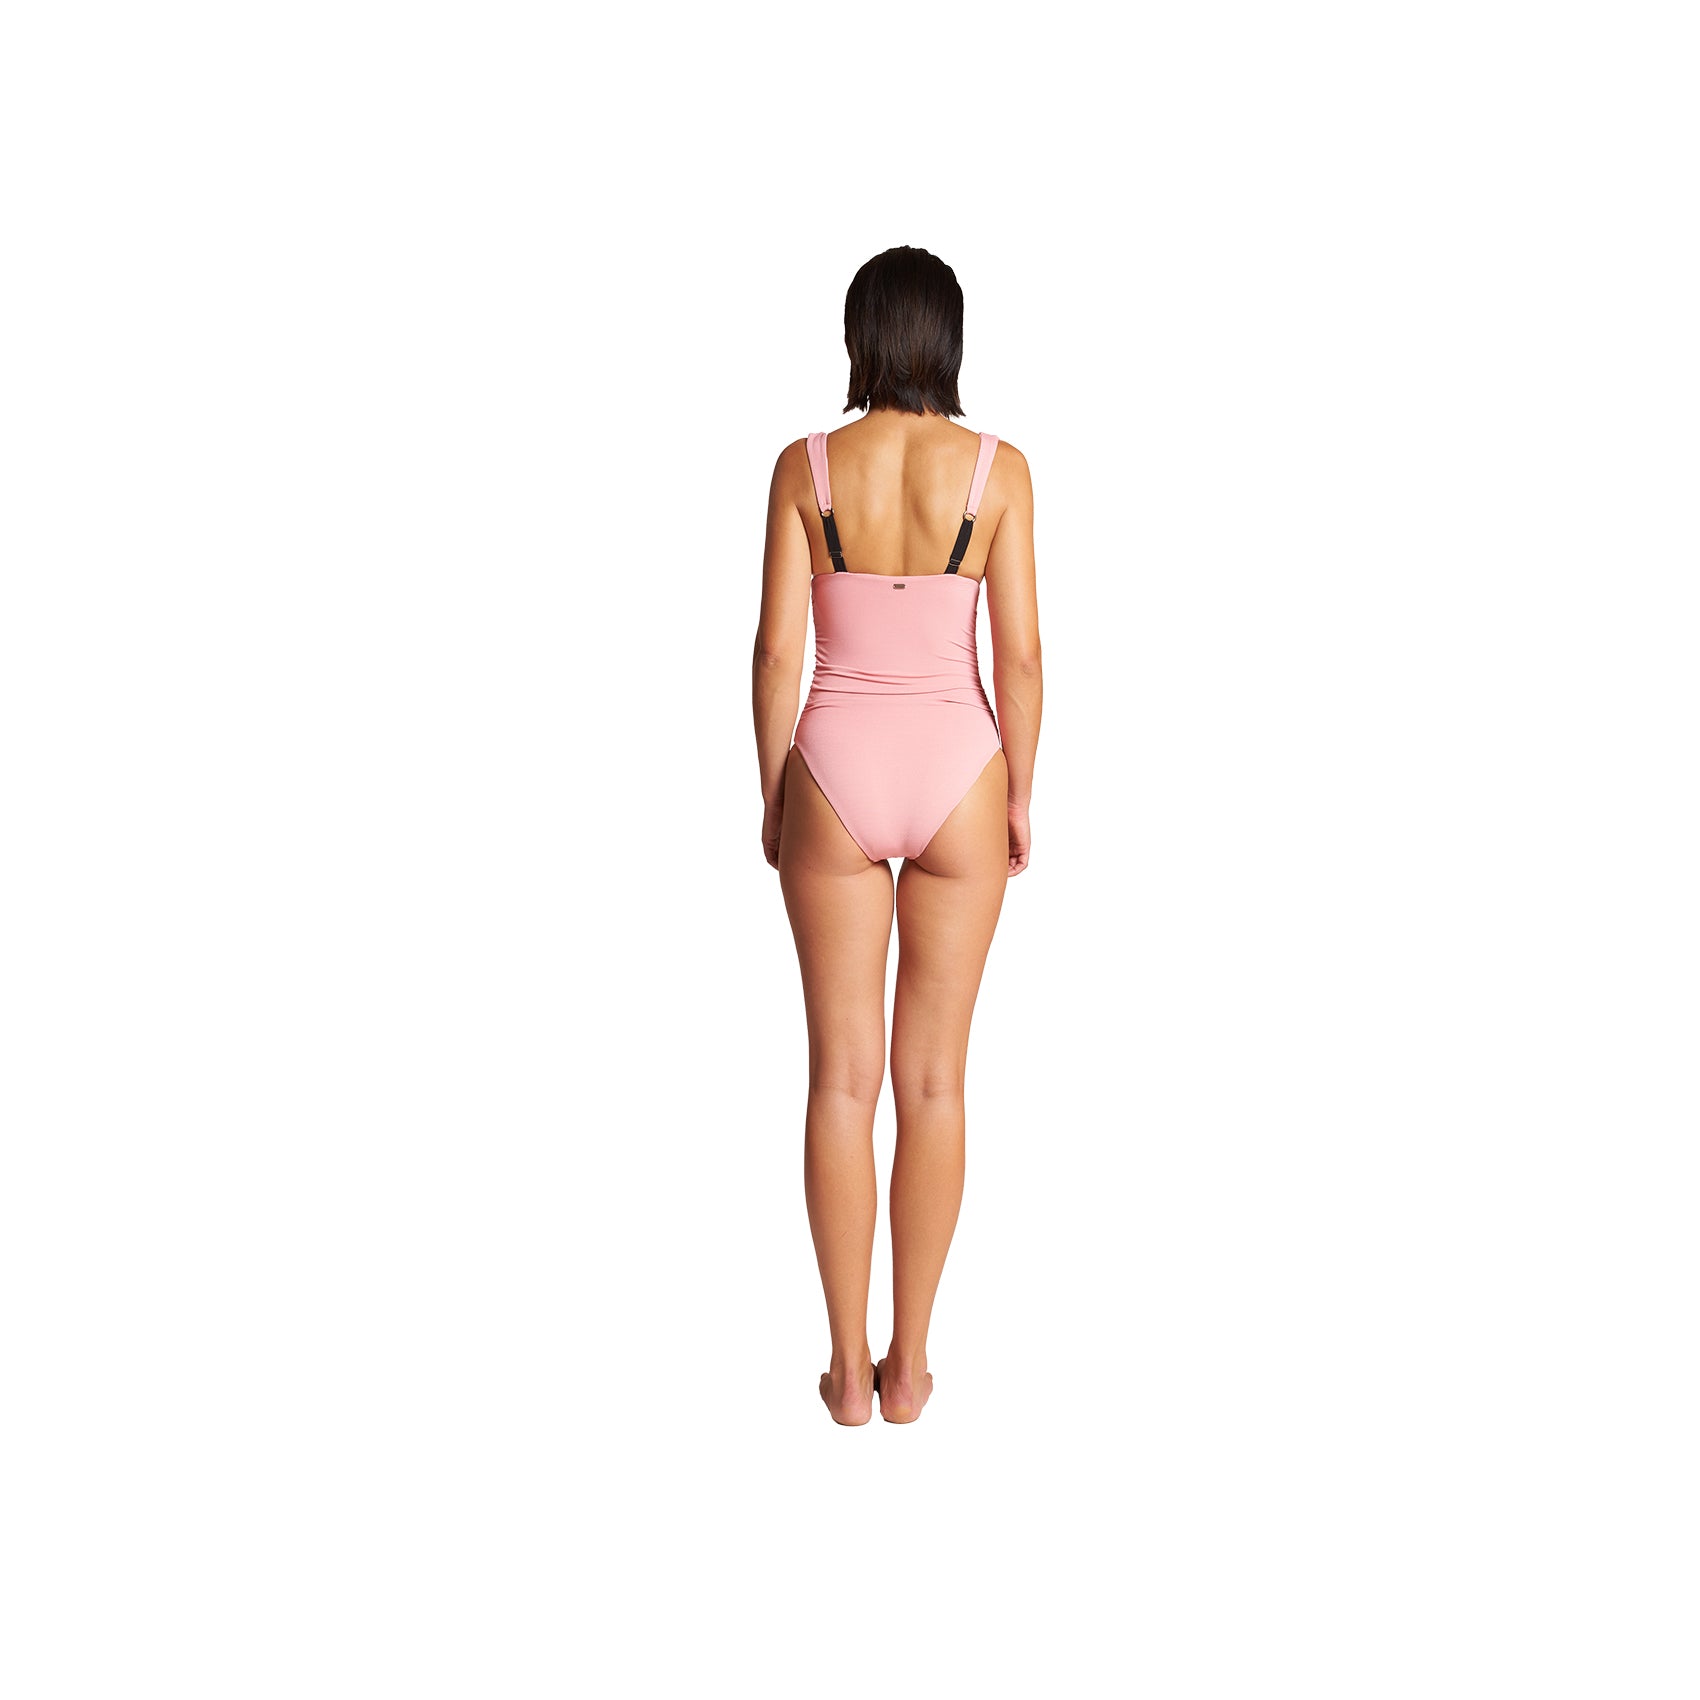 Athena Pique One Piece in Rose